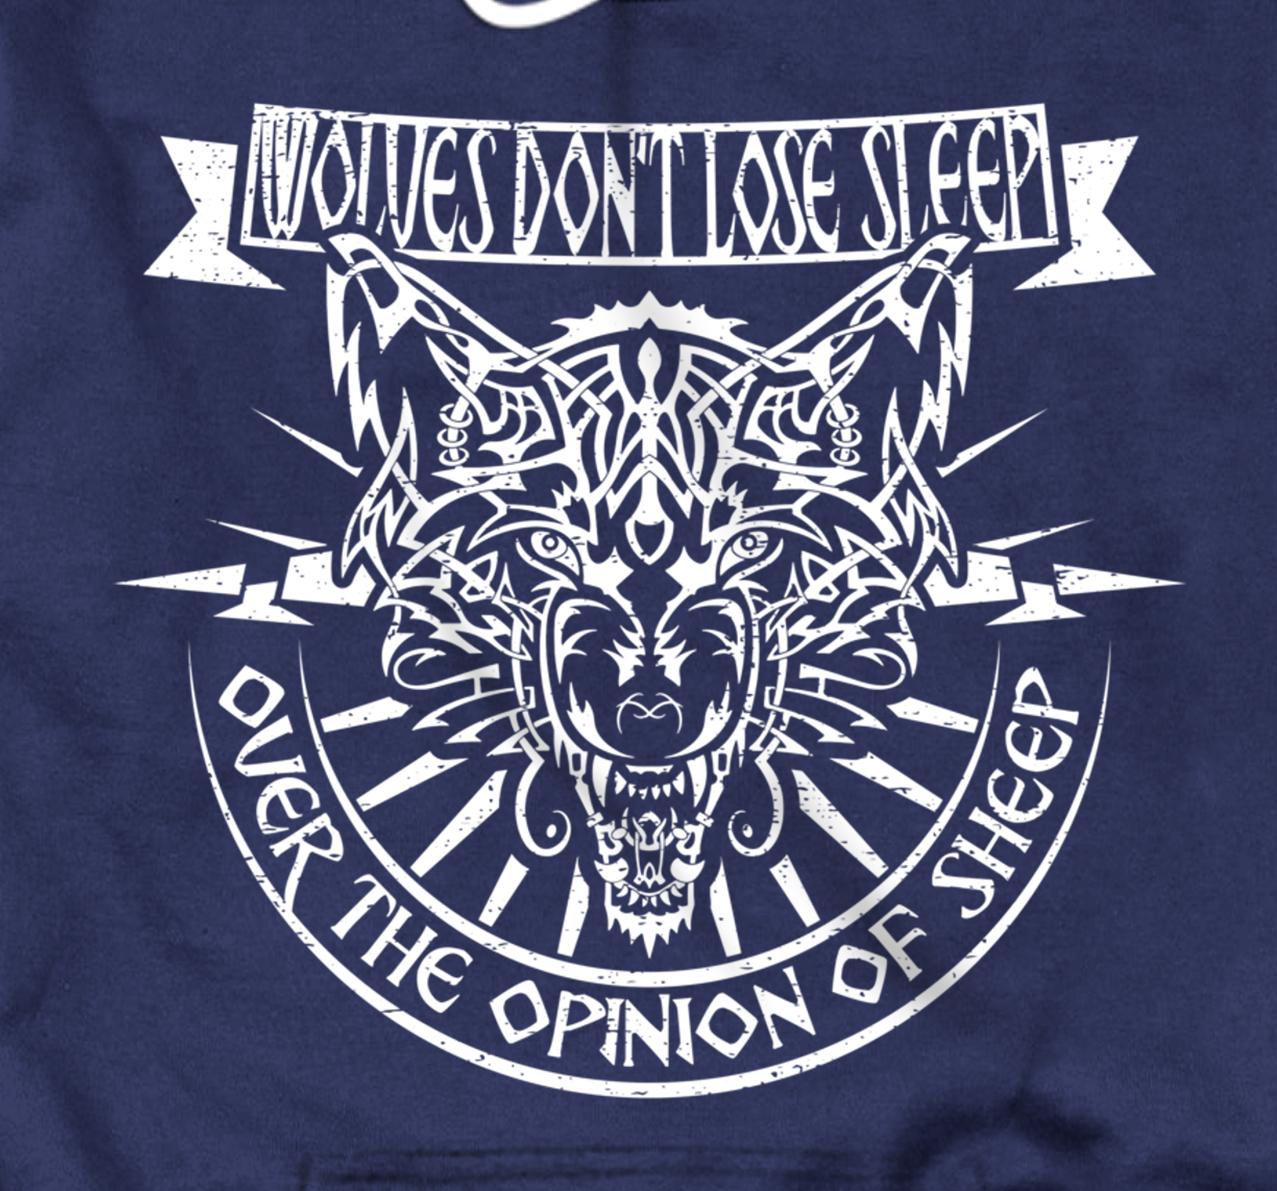 wolves dont lose sleep over the opinions of sheep